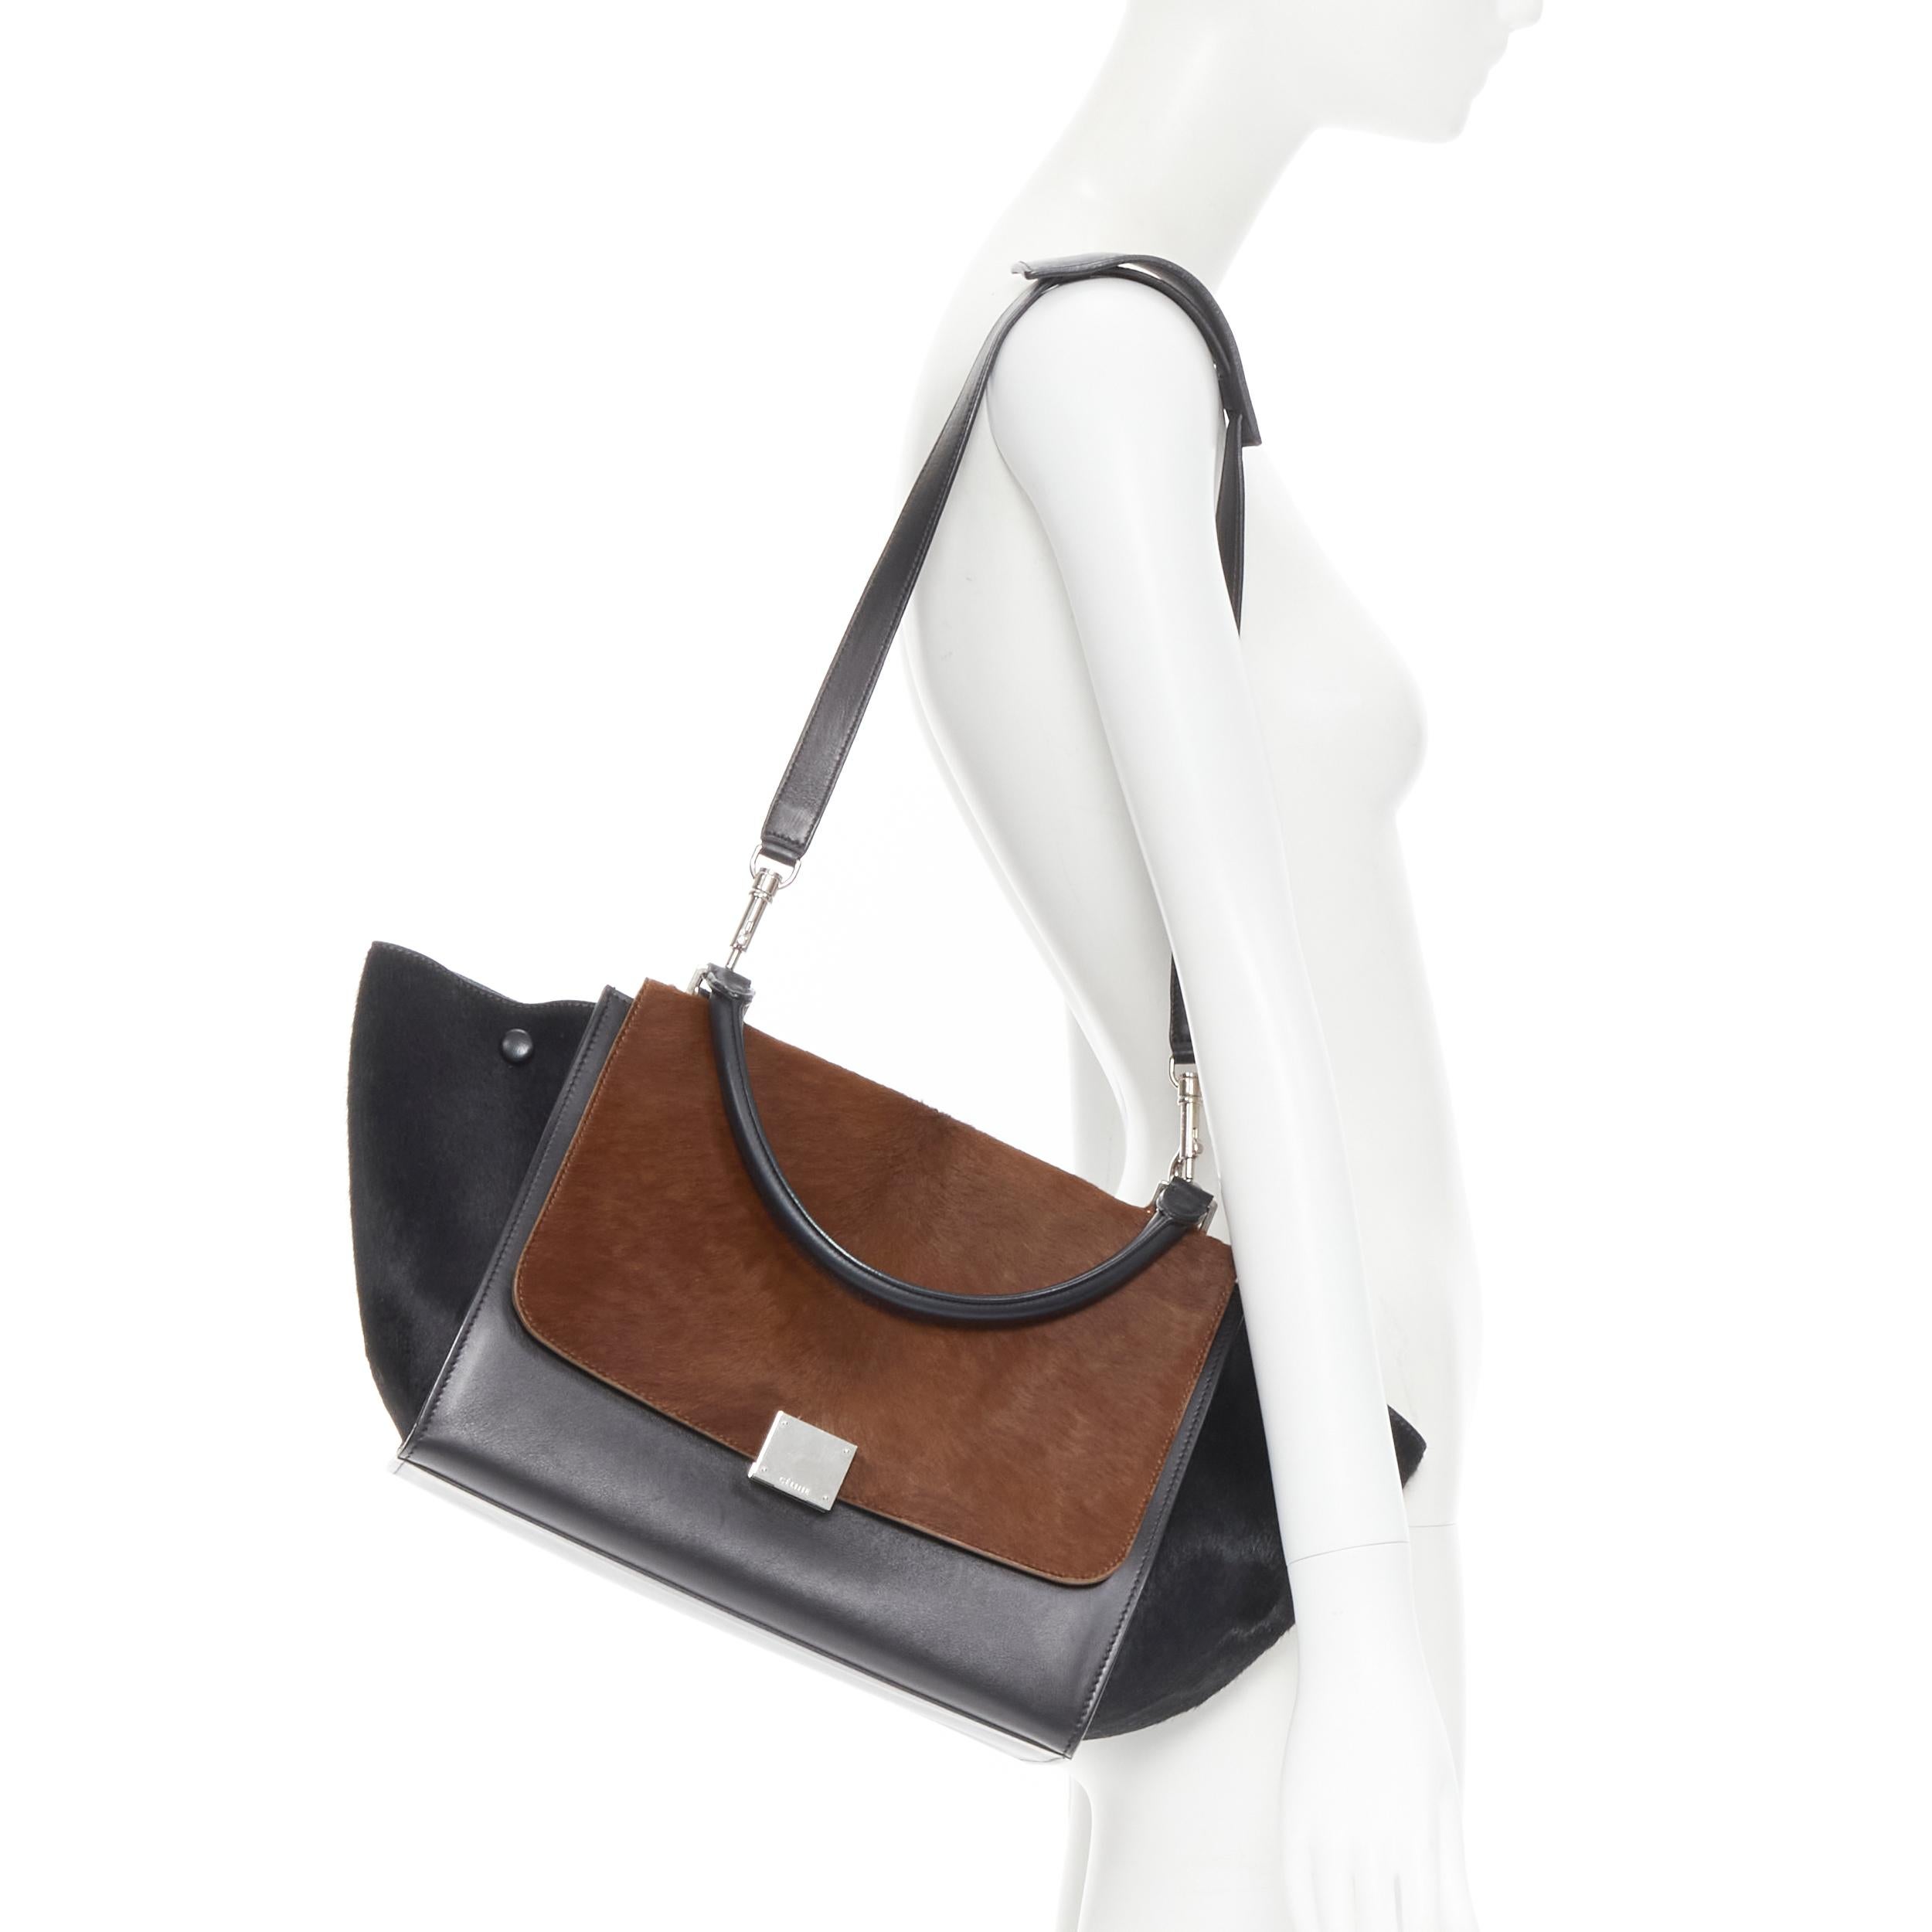 CELINE Medium Trapeze black brown horse hair silver buckle crossbody satchel bag 
Reference: GIYG/A00088 
Brand: Celine 
Designer: Phoebe Philo 
Model: Medium Trapeze 
Material: Leather 
Color: Brown 
Pattern: Solid 
Closure: Clasp 
Extra Detail: